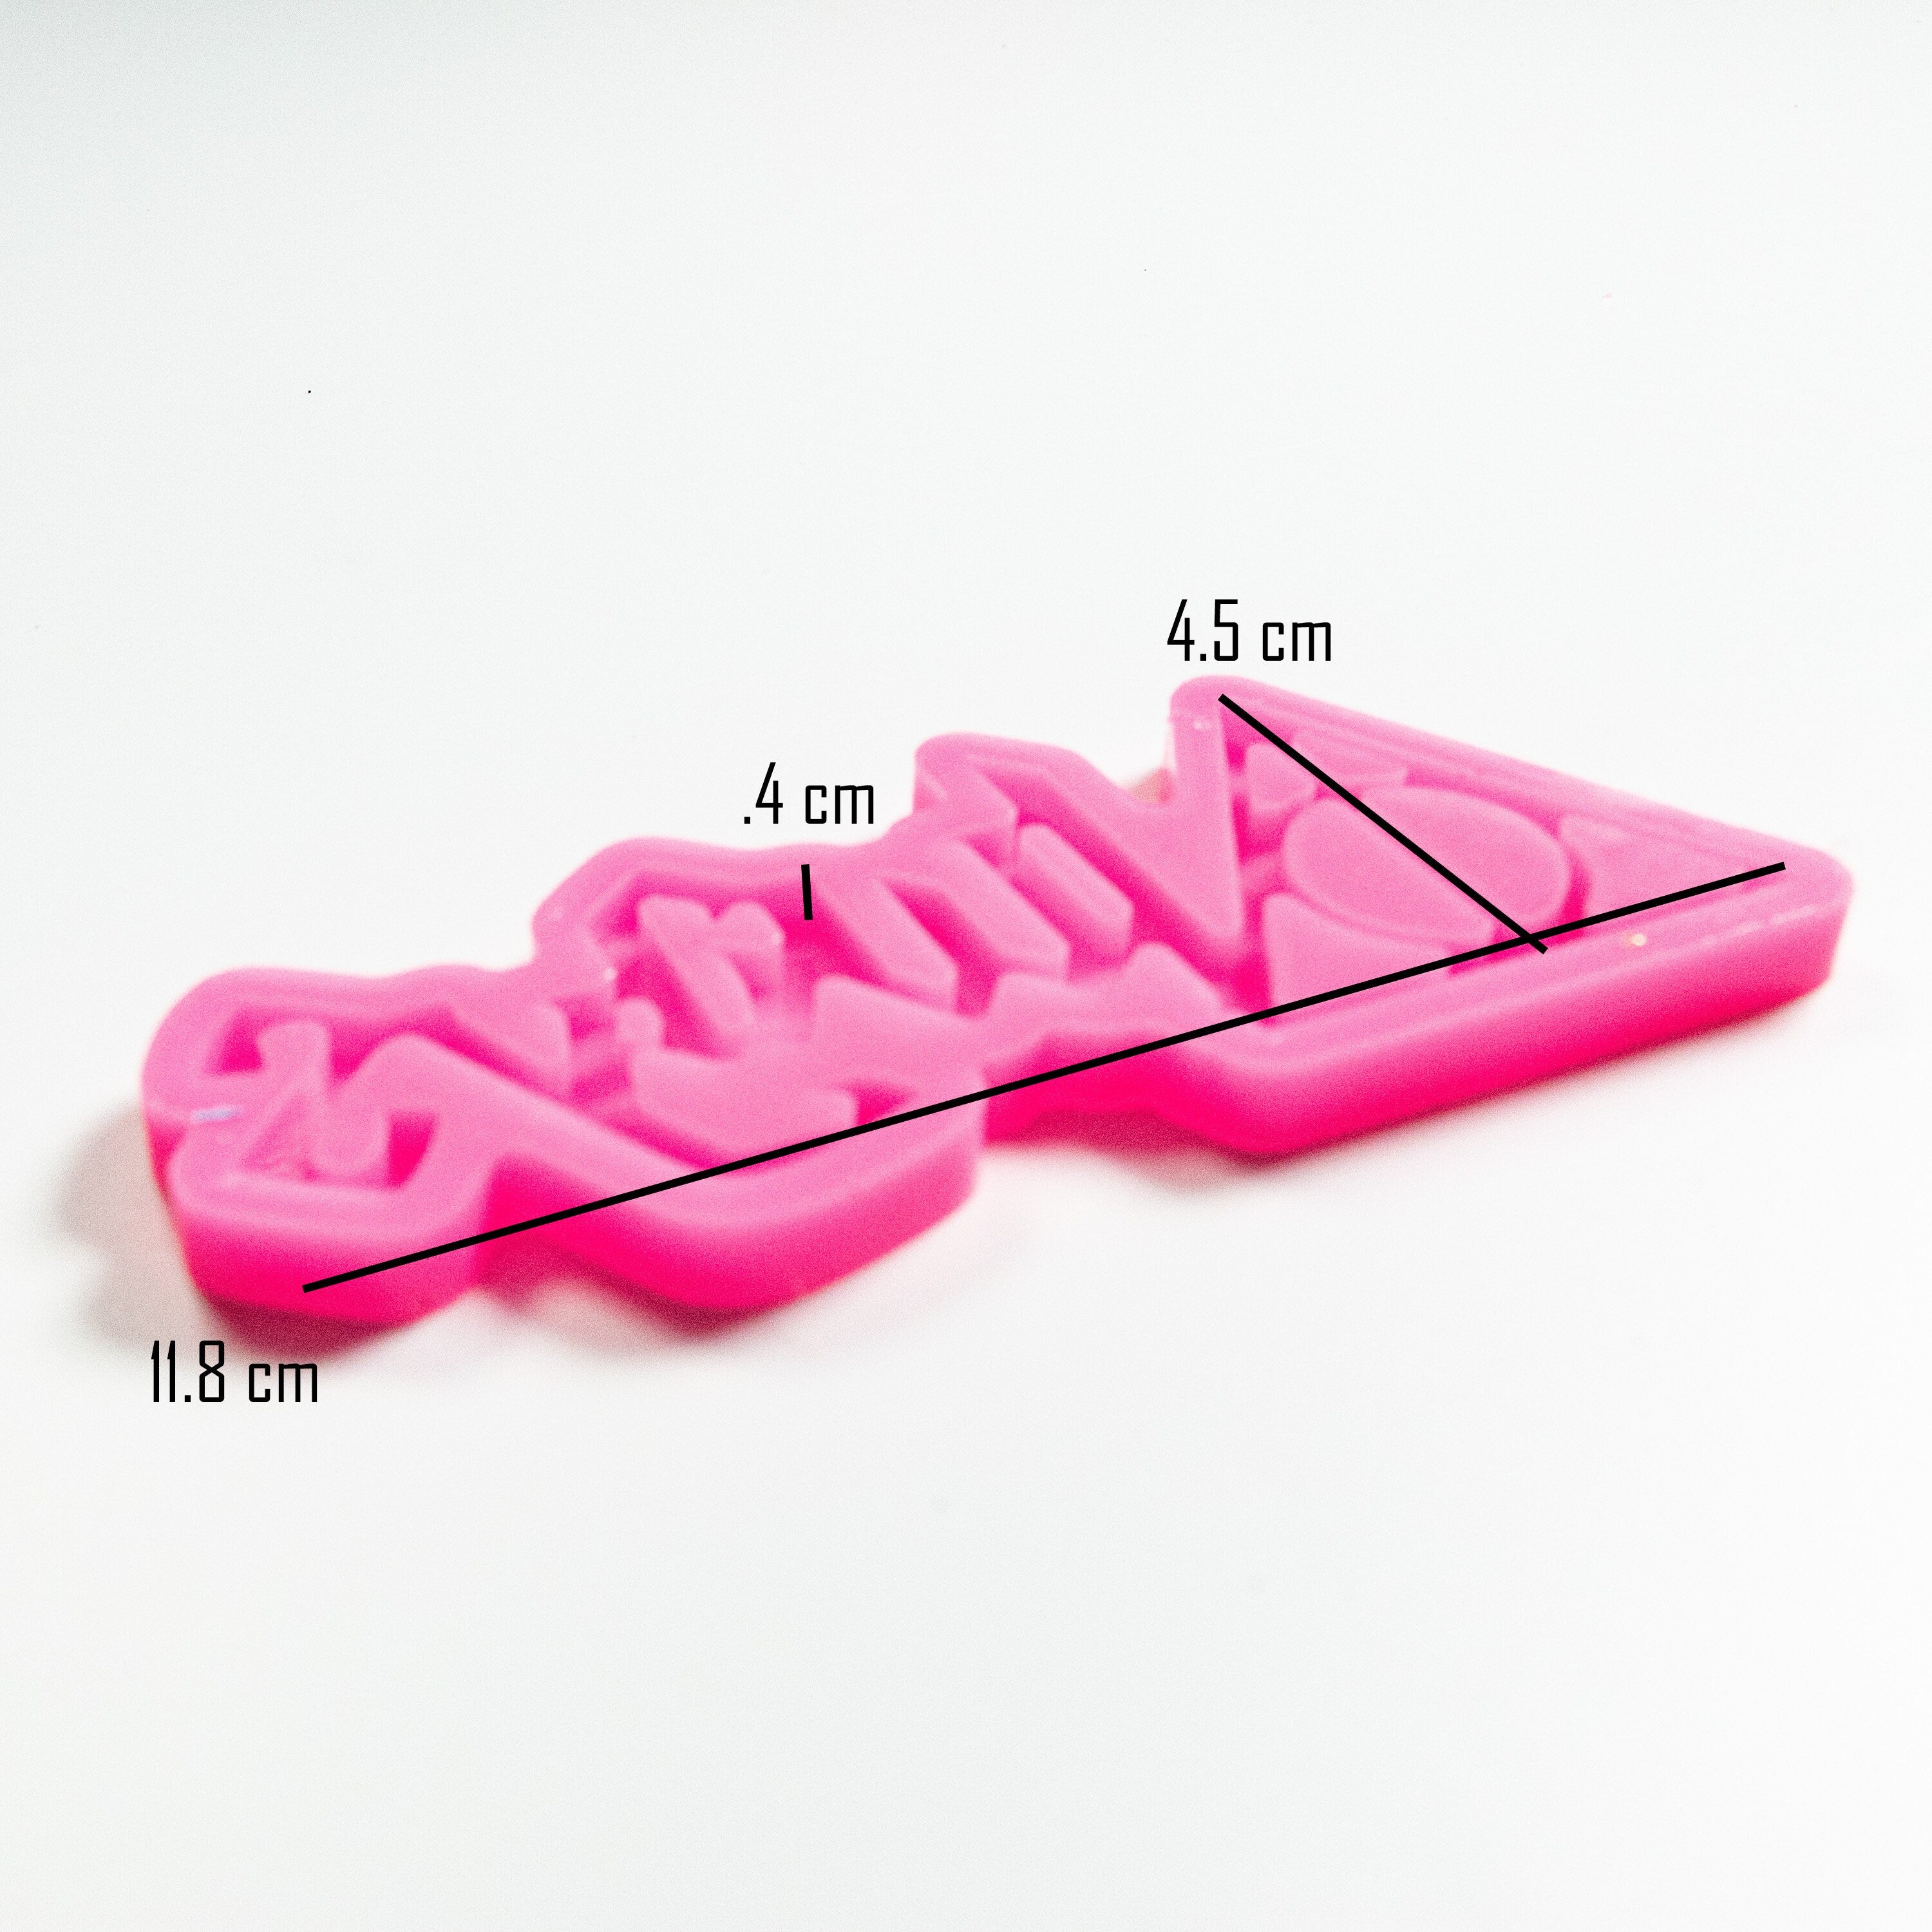 Always Shiny Silicone Mold for Epoxy Resin Keychain - Jewelry Making - Ornament Silicone Mold